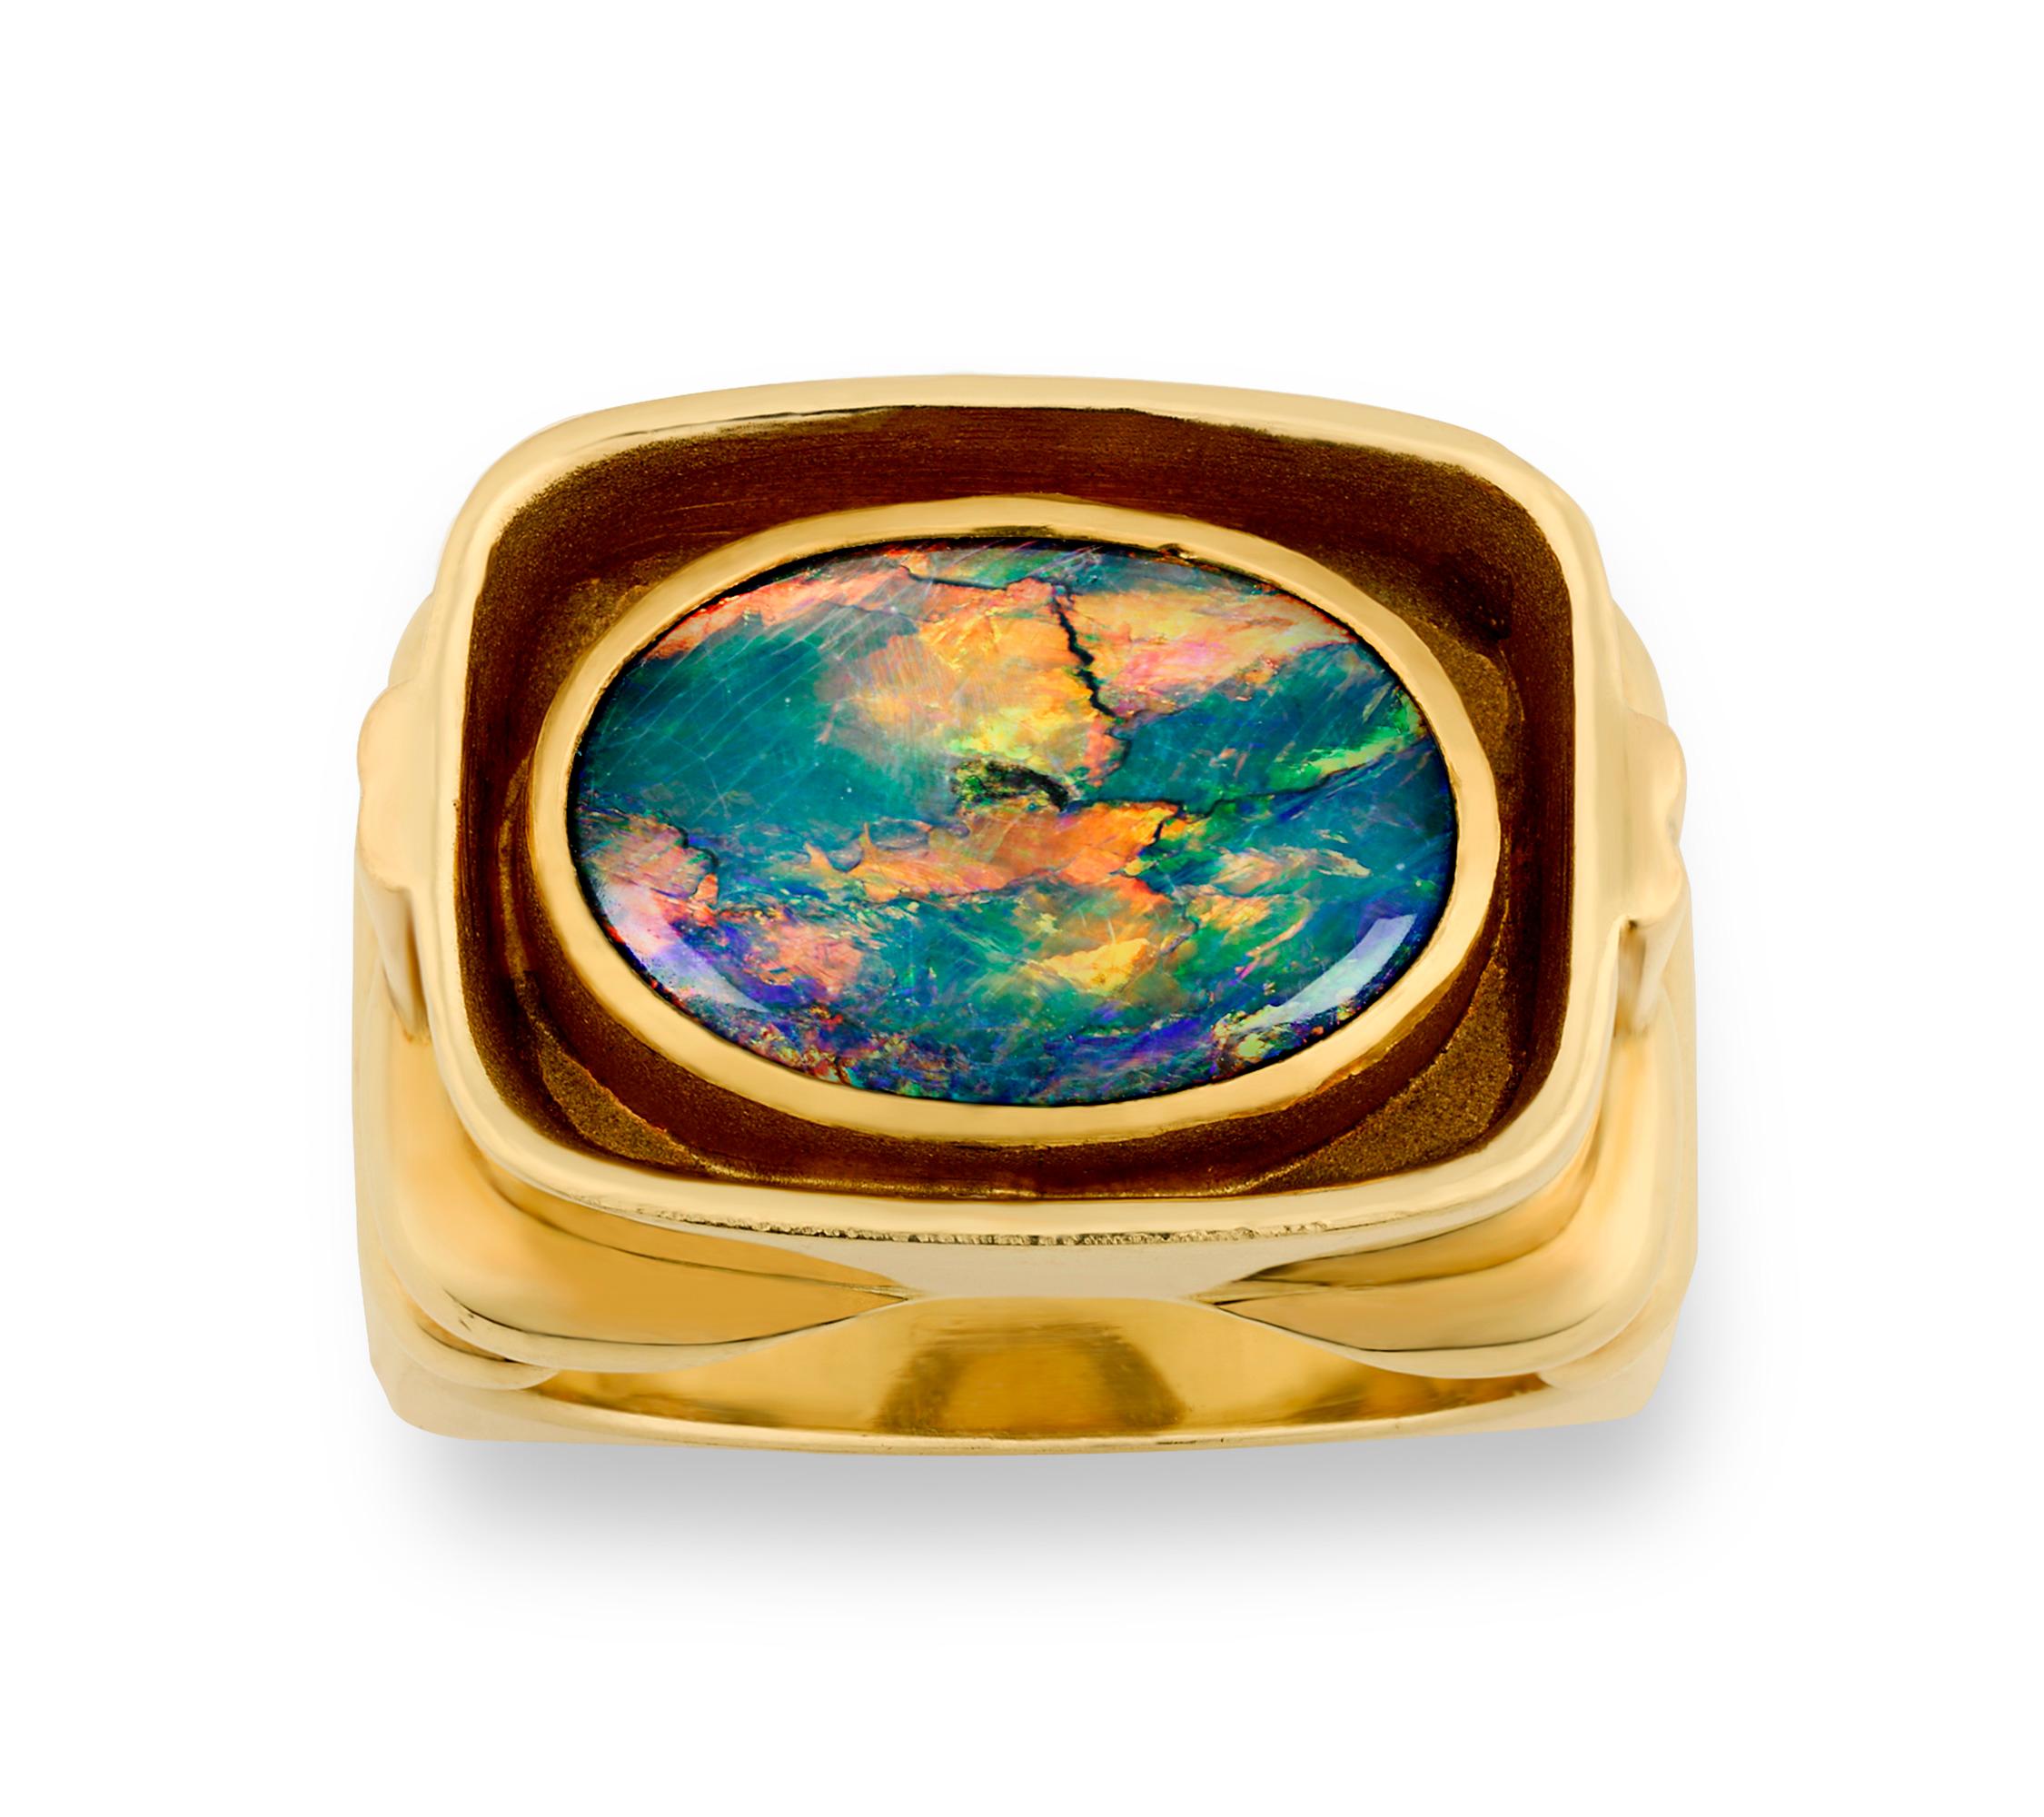 With its vibrant hues of blue, green, orange and yellow, the extraordinary Lightning Ridge opal in this ring weighs approximately 2.50 carats and displays a kaleidoscope of colors. Opals from the Lightning Ridge mines in Australia are known for